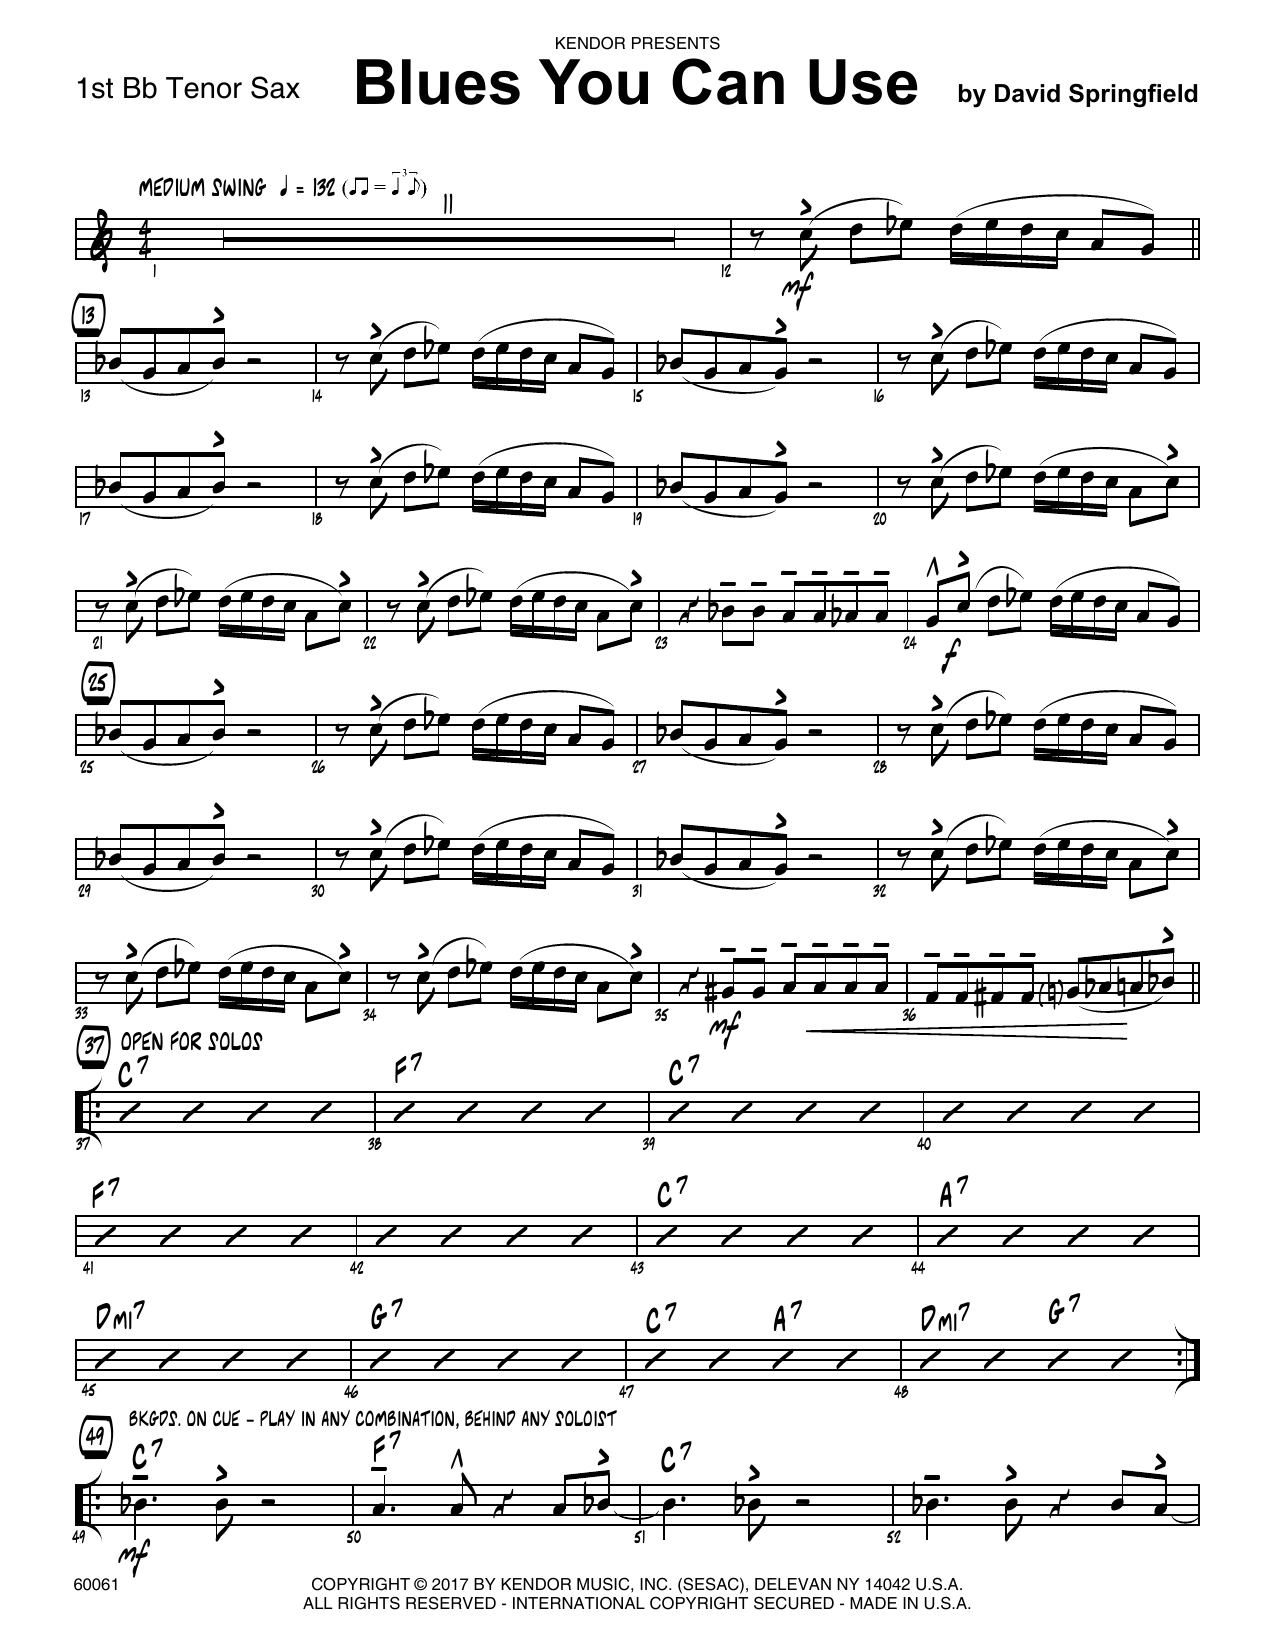 Download David Springfield Blues You Can Use - 1st Tenor Saxophone sheet music and printable PDF score & Jazz music notes